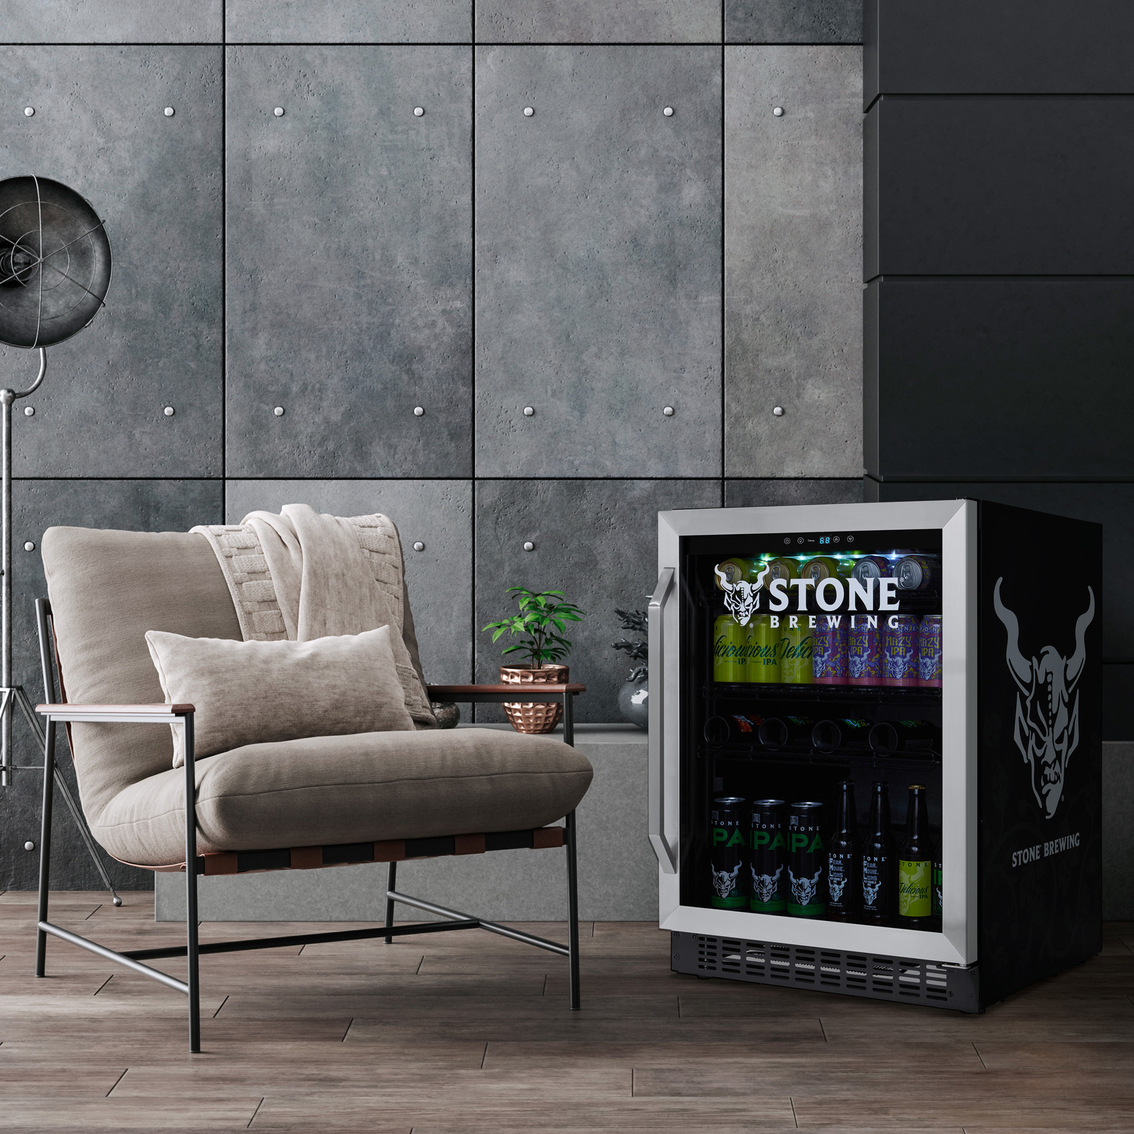 New Air LLC Stone Brewing 180 Can FlipShelf Beer and Beverage Refrigerator - Image 9 of 10